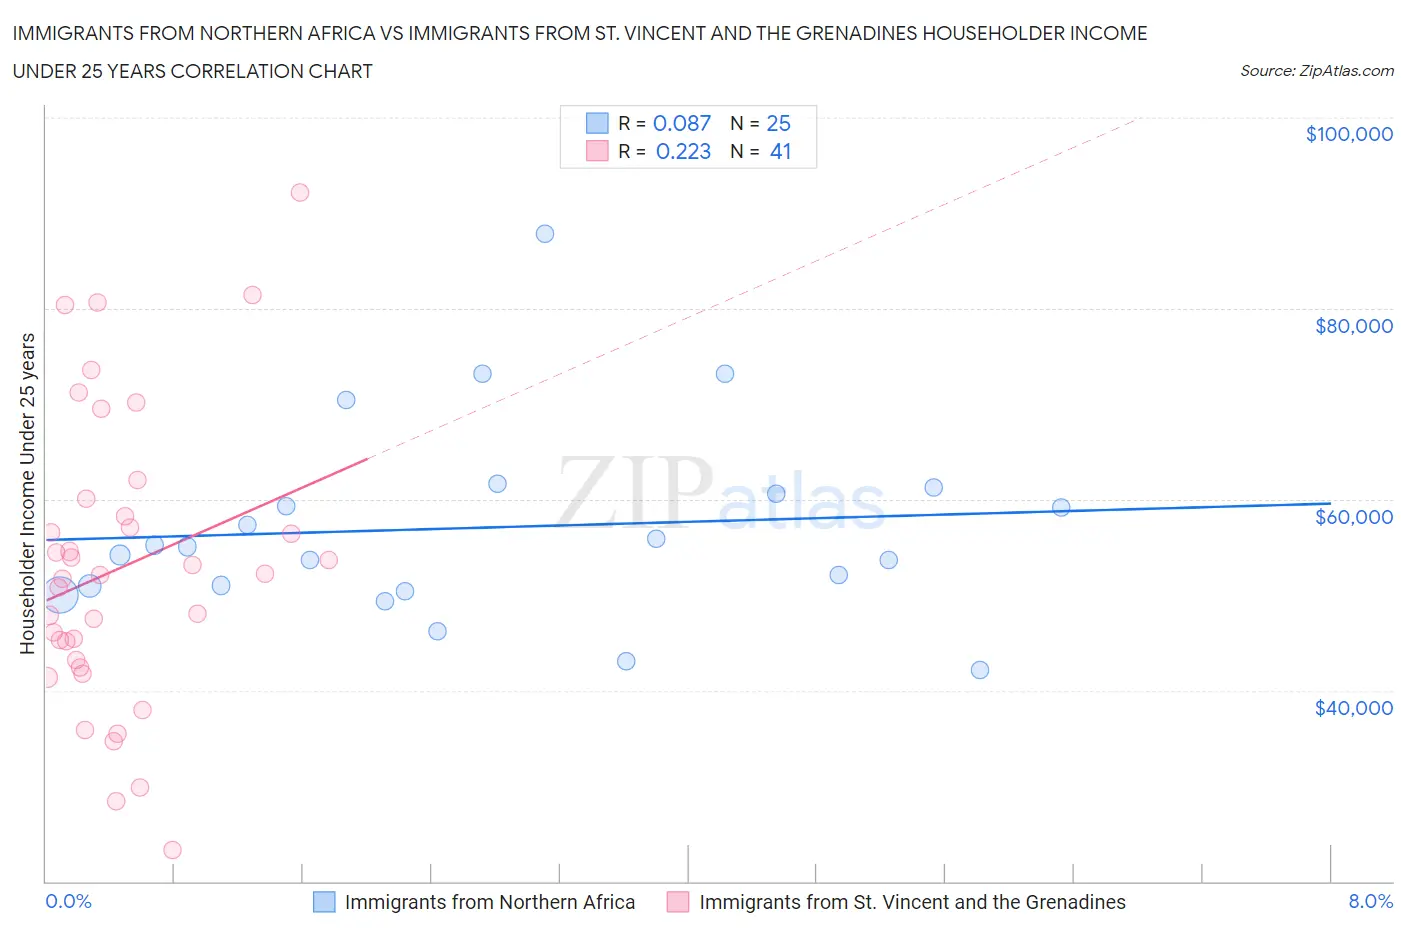 Immigrants from Northern Africa vs Immigrants from St. Vincent and the Grenadines Householder Income Under 25 years